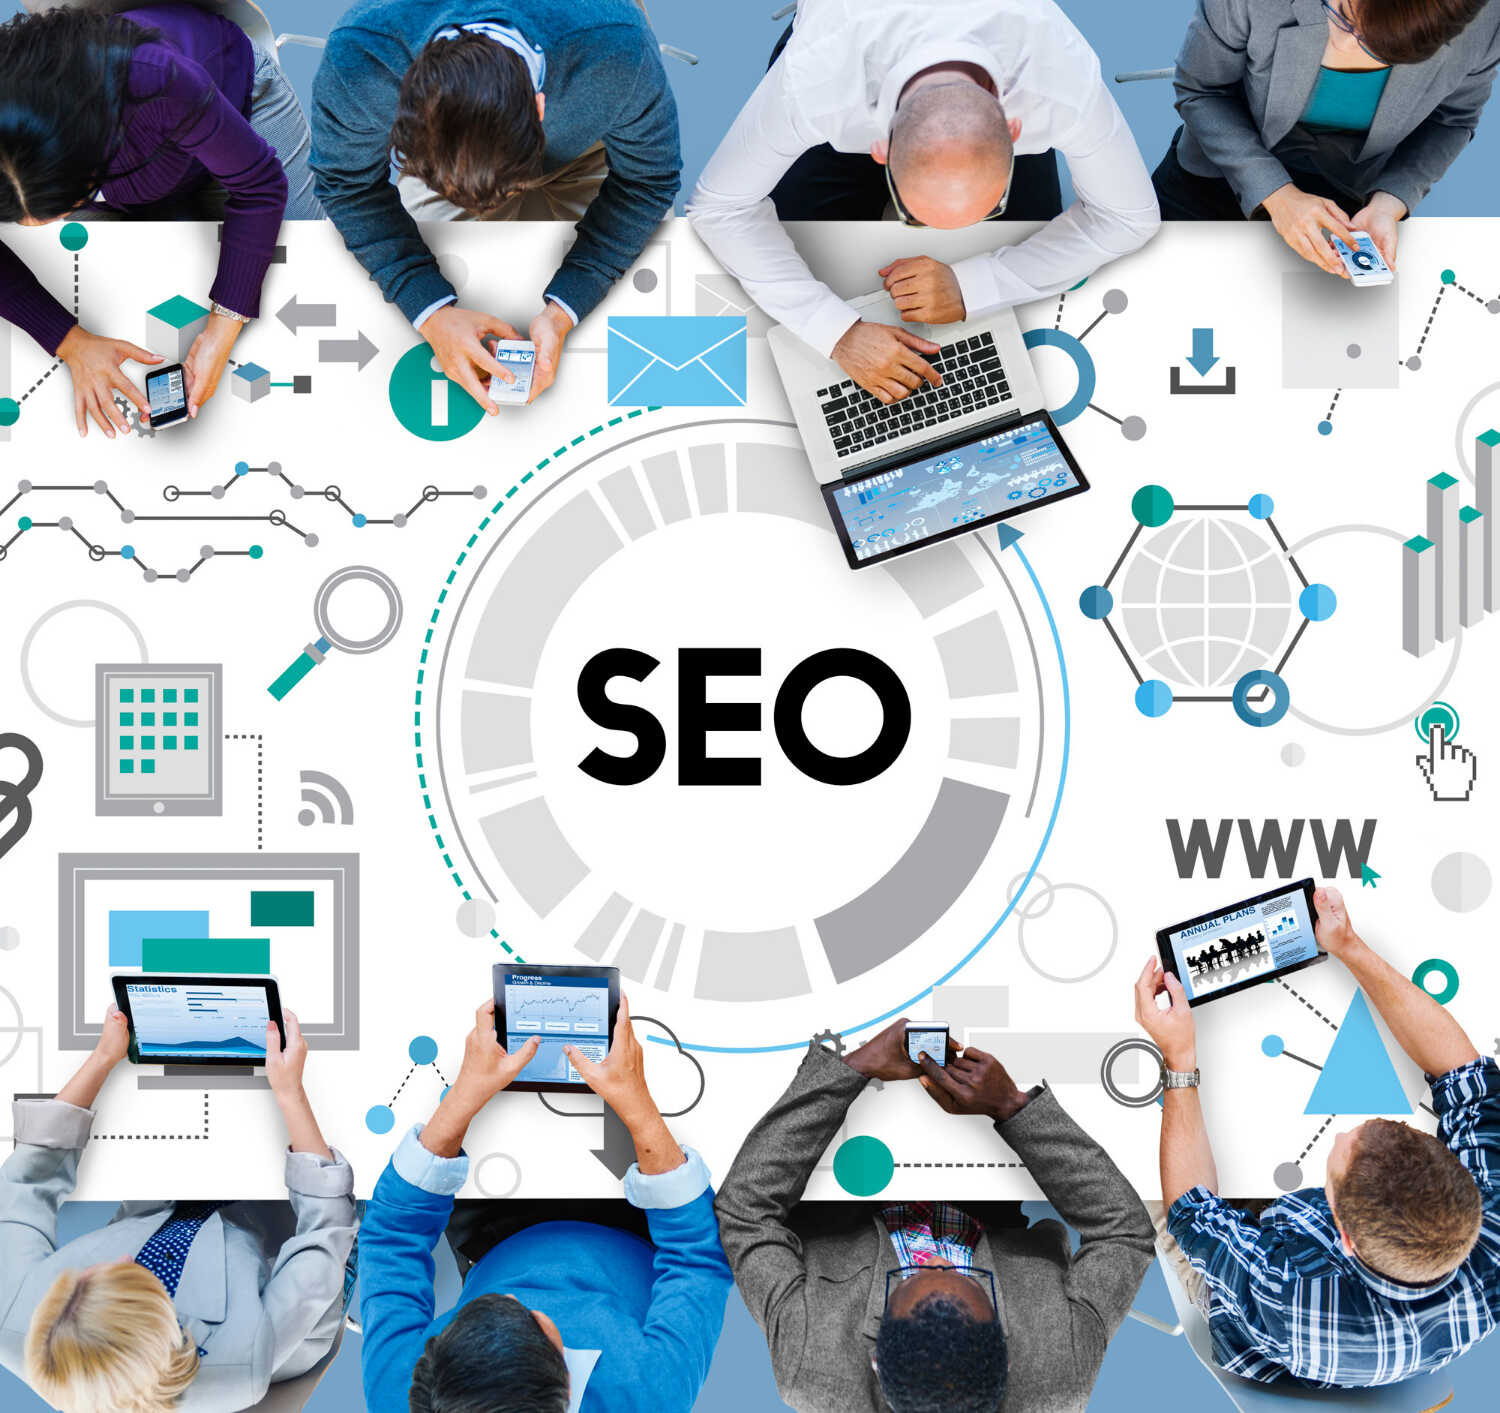 How To Get Your Website Ranked High In Google & Other Search Engines-eTCS